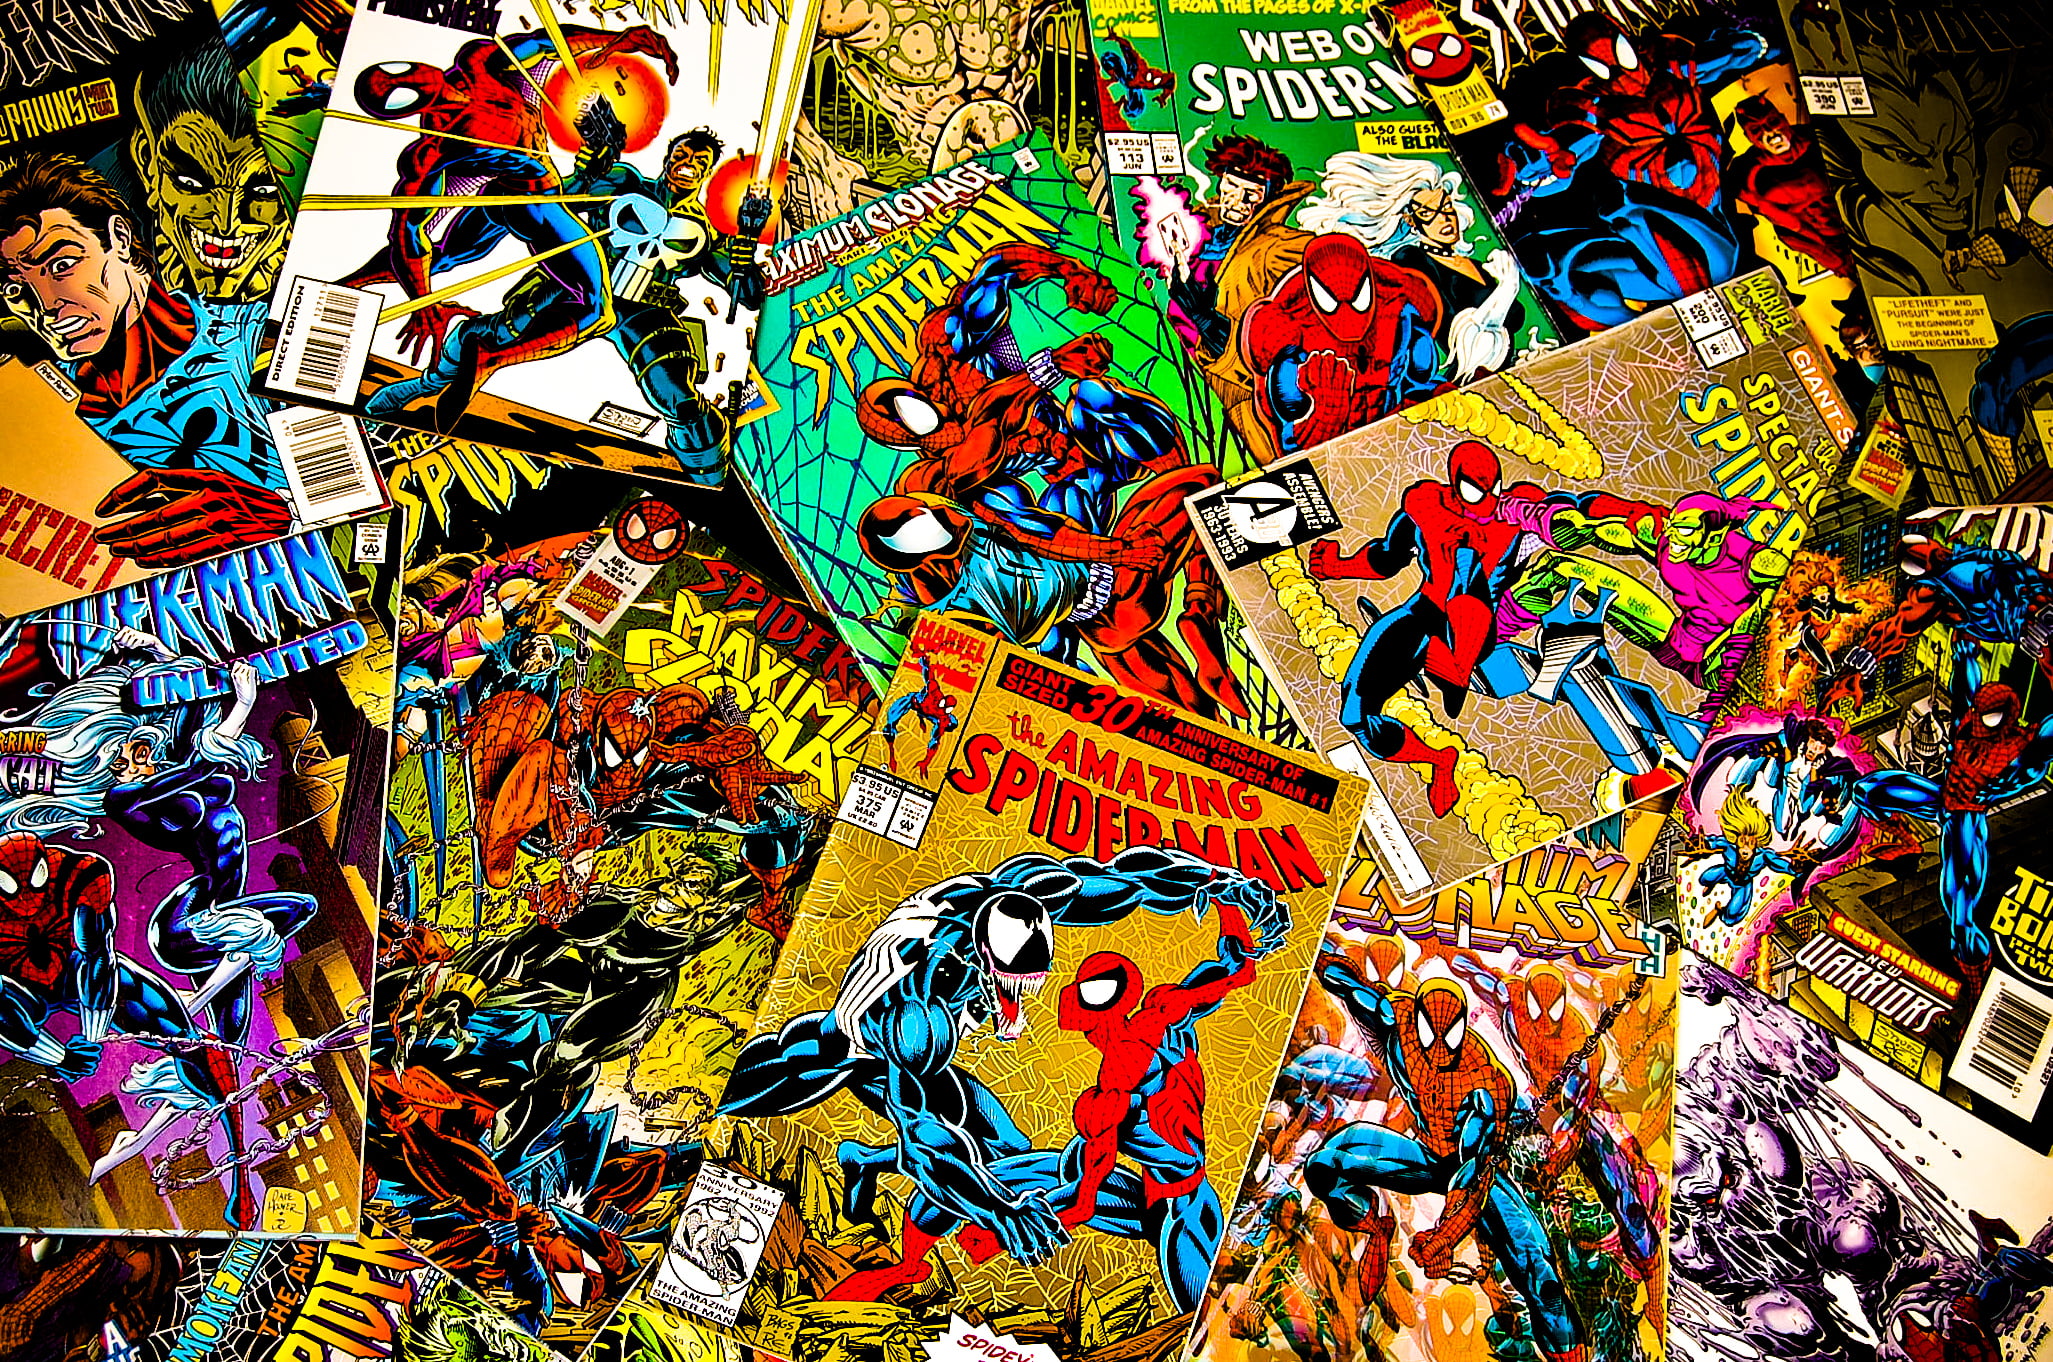 comic book collection, colors, comics, disorder, covers, magazines